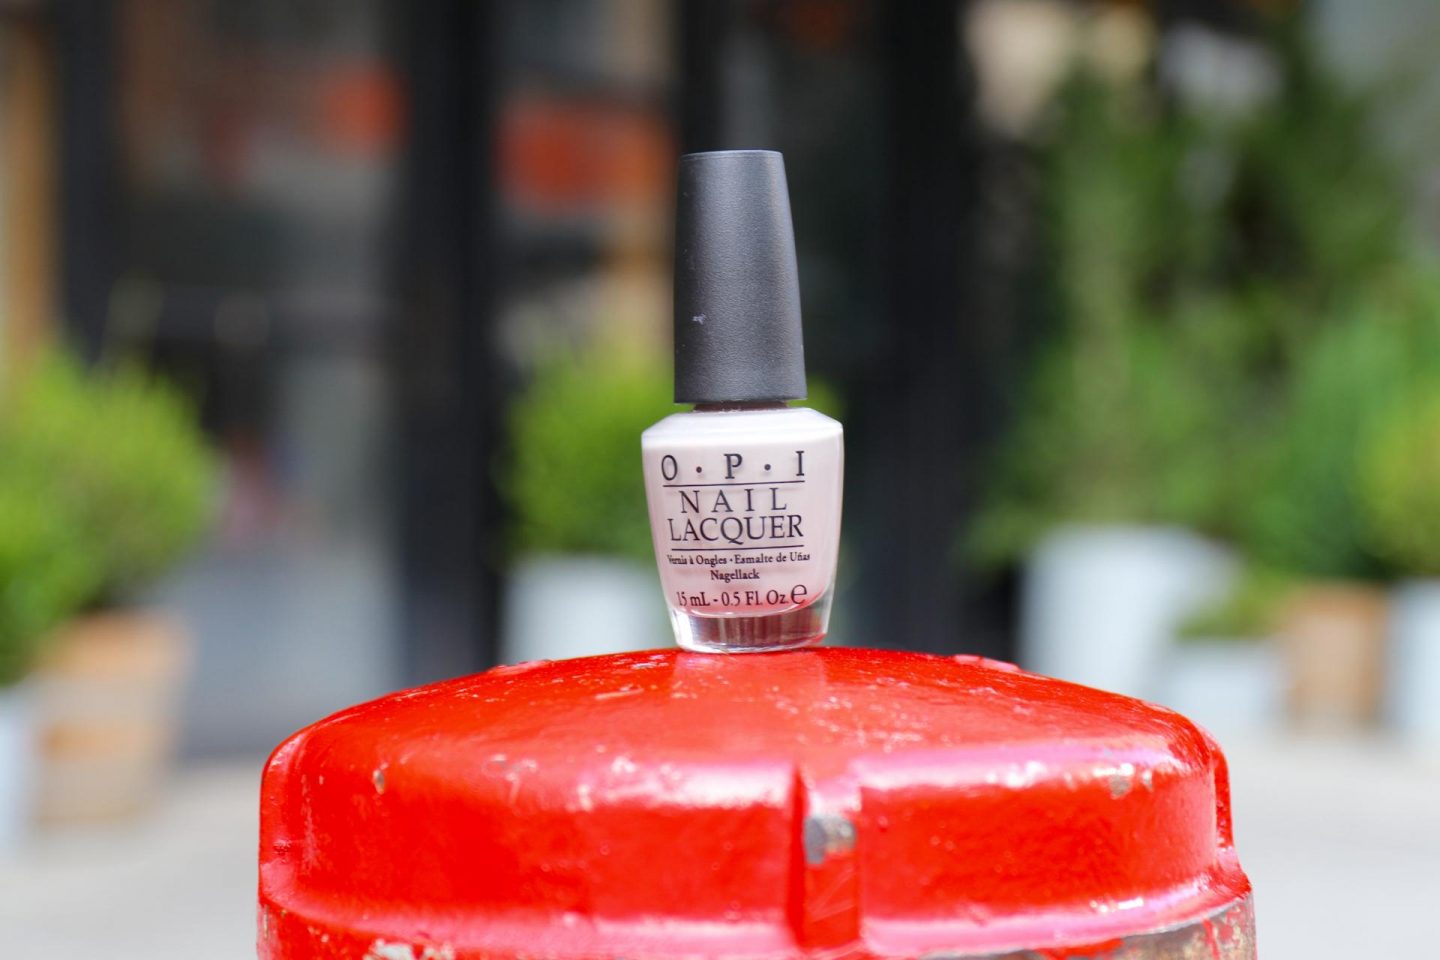 “French Quarter for Your Thoughts” by OPI